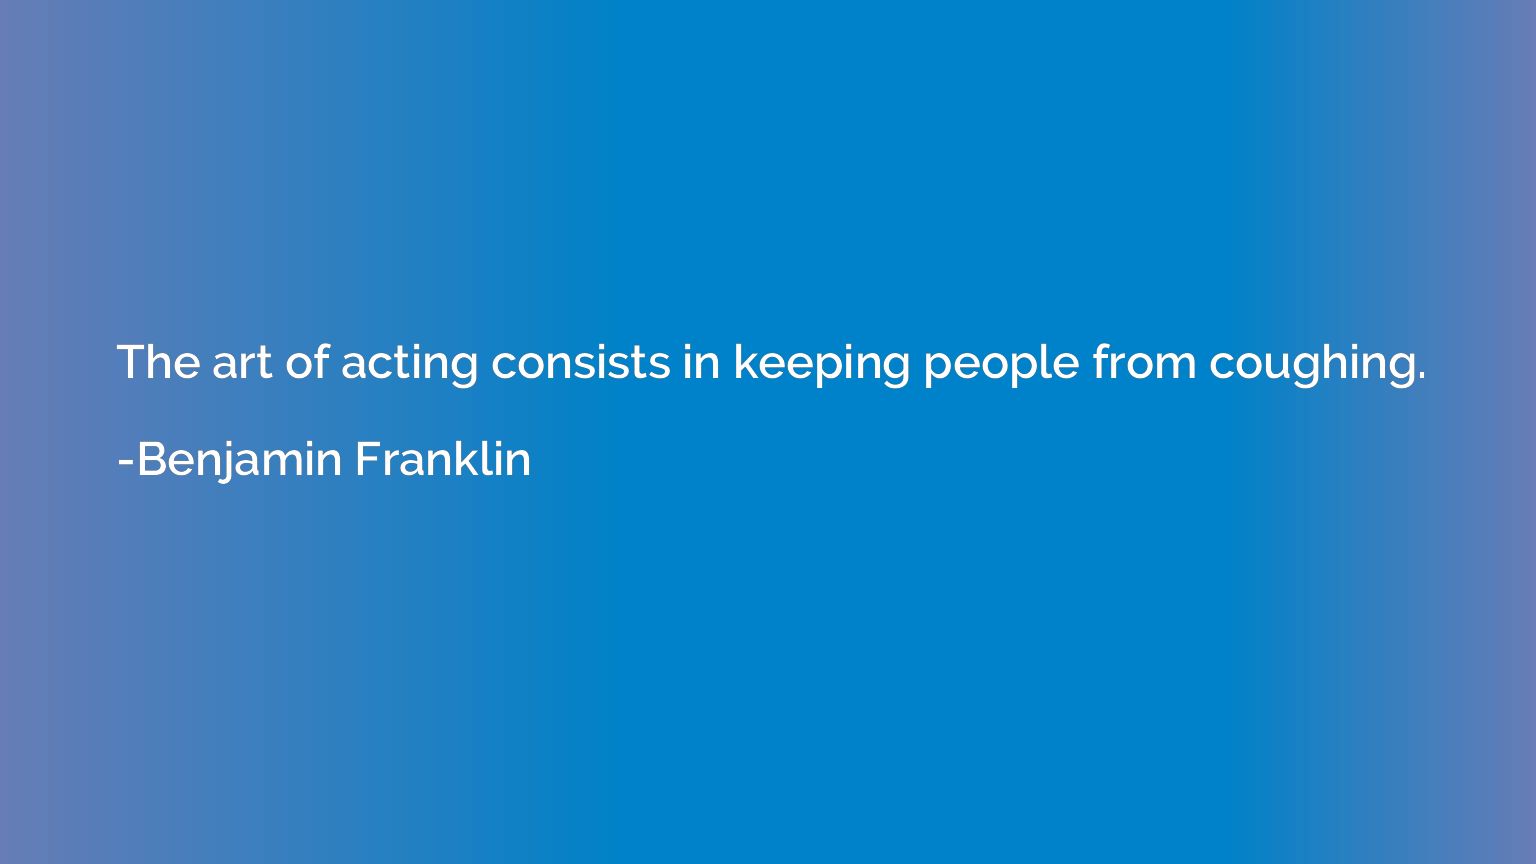 The art of acting consists in keeping people from coughing.